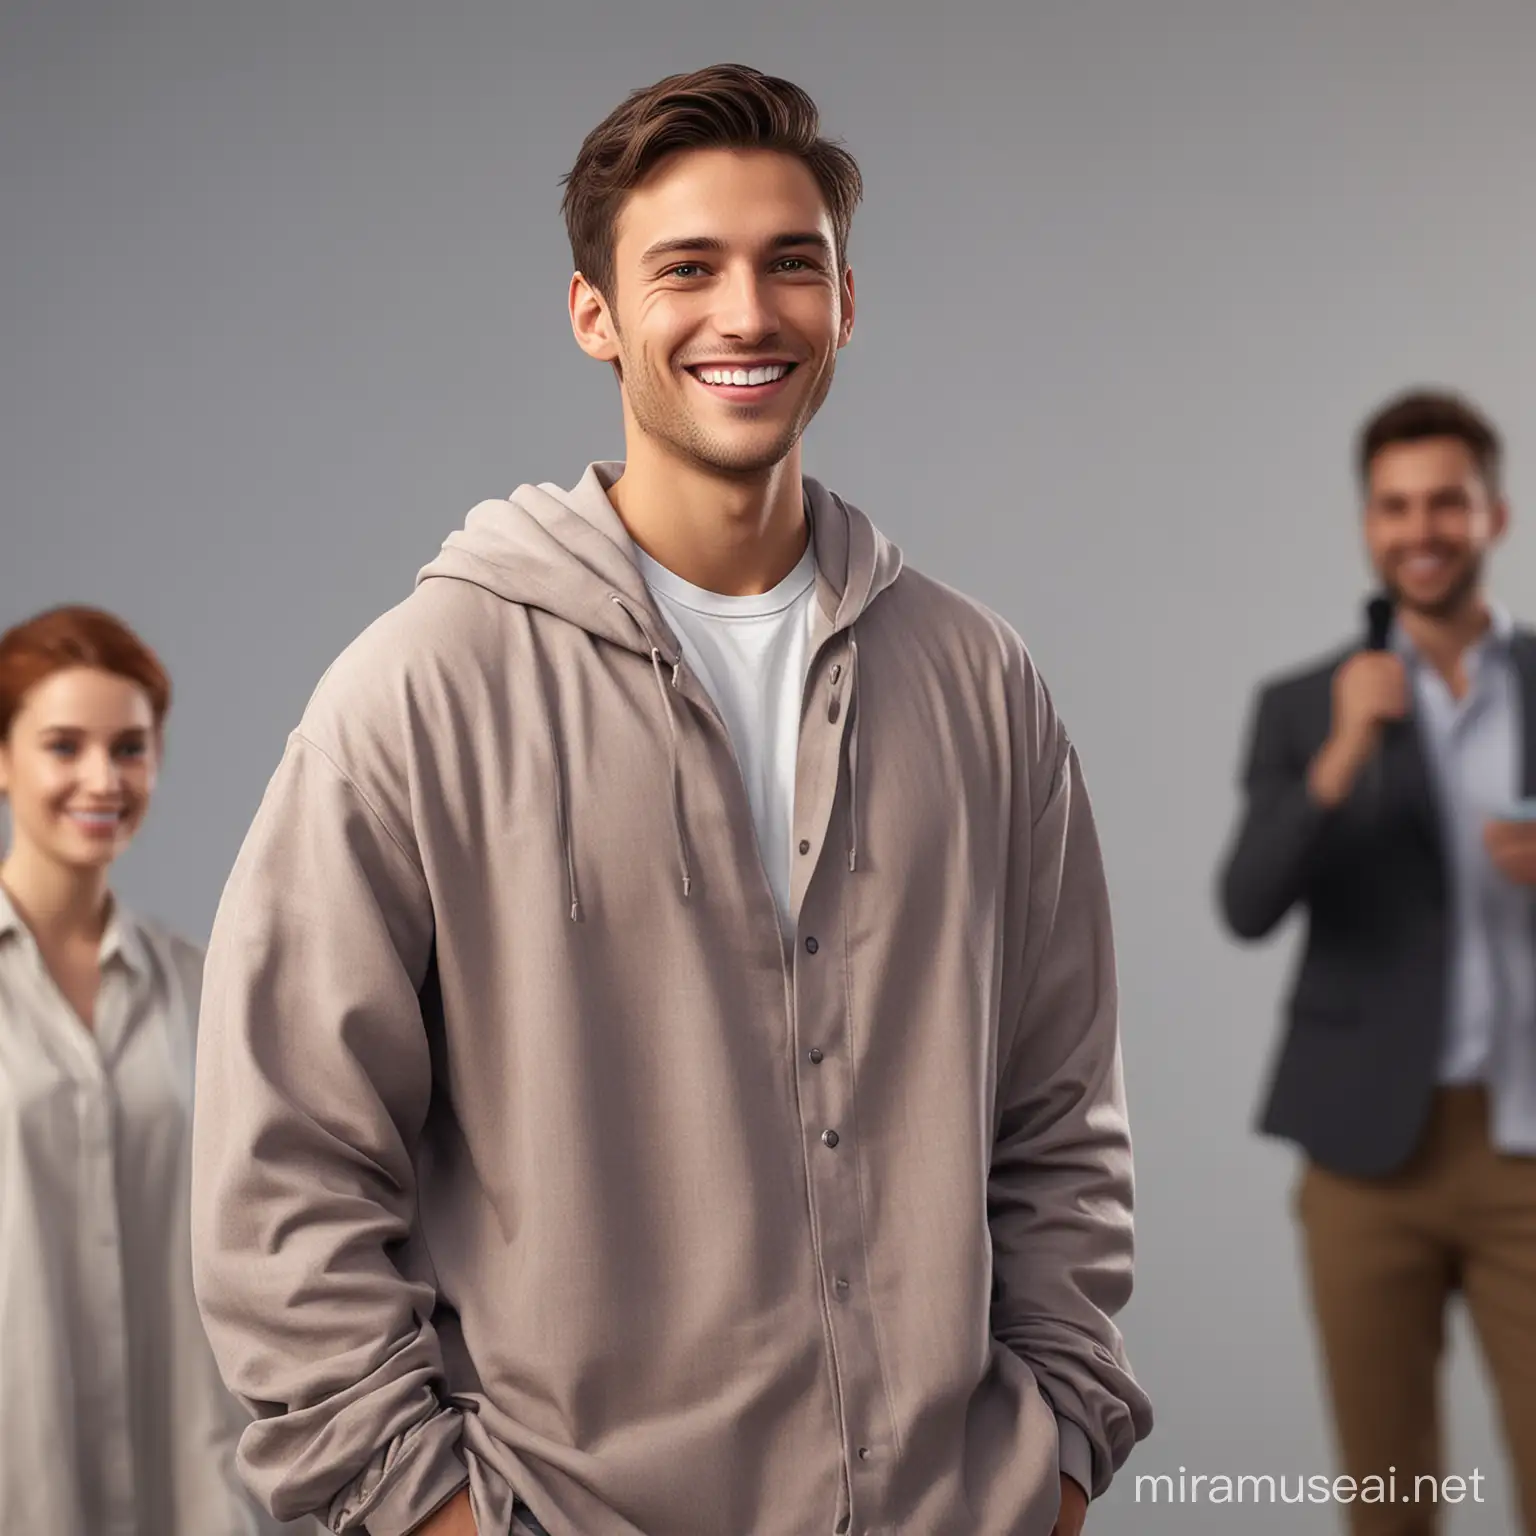 Smiling Young Male Interviewee in Oversized Attire at Event